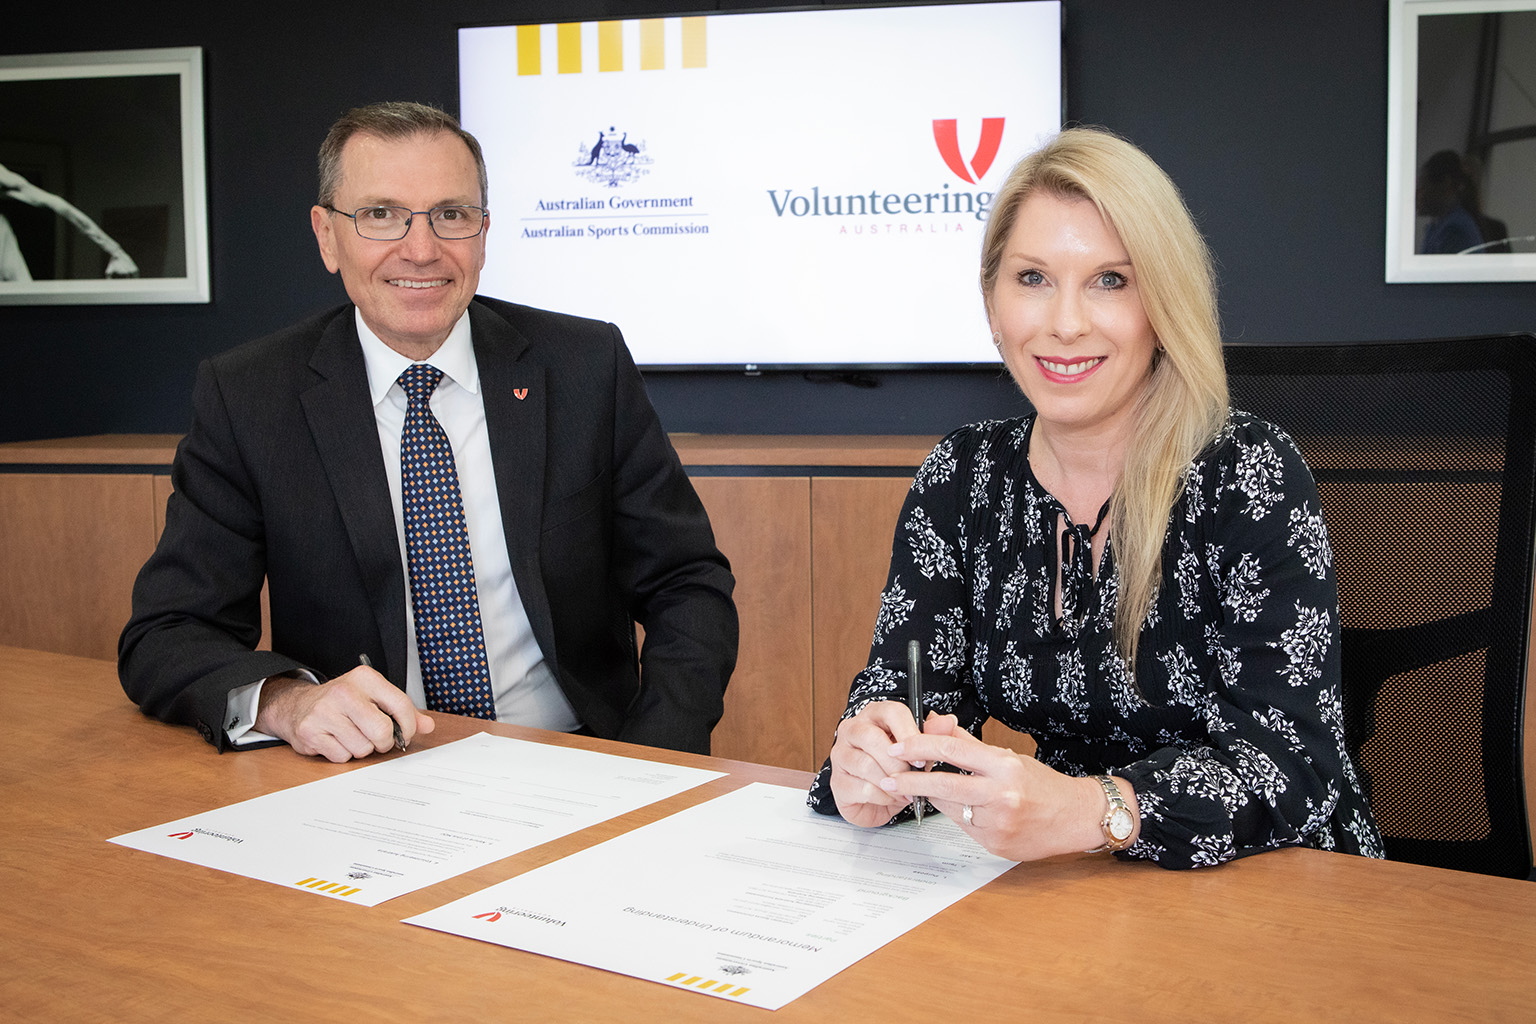 Mark Pearce and Brooke De Landre at a desk signing papers. A screen in the background displays Australian Sports Commission crest and Volunteering Australia logo.